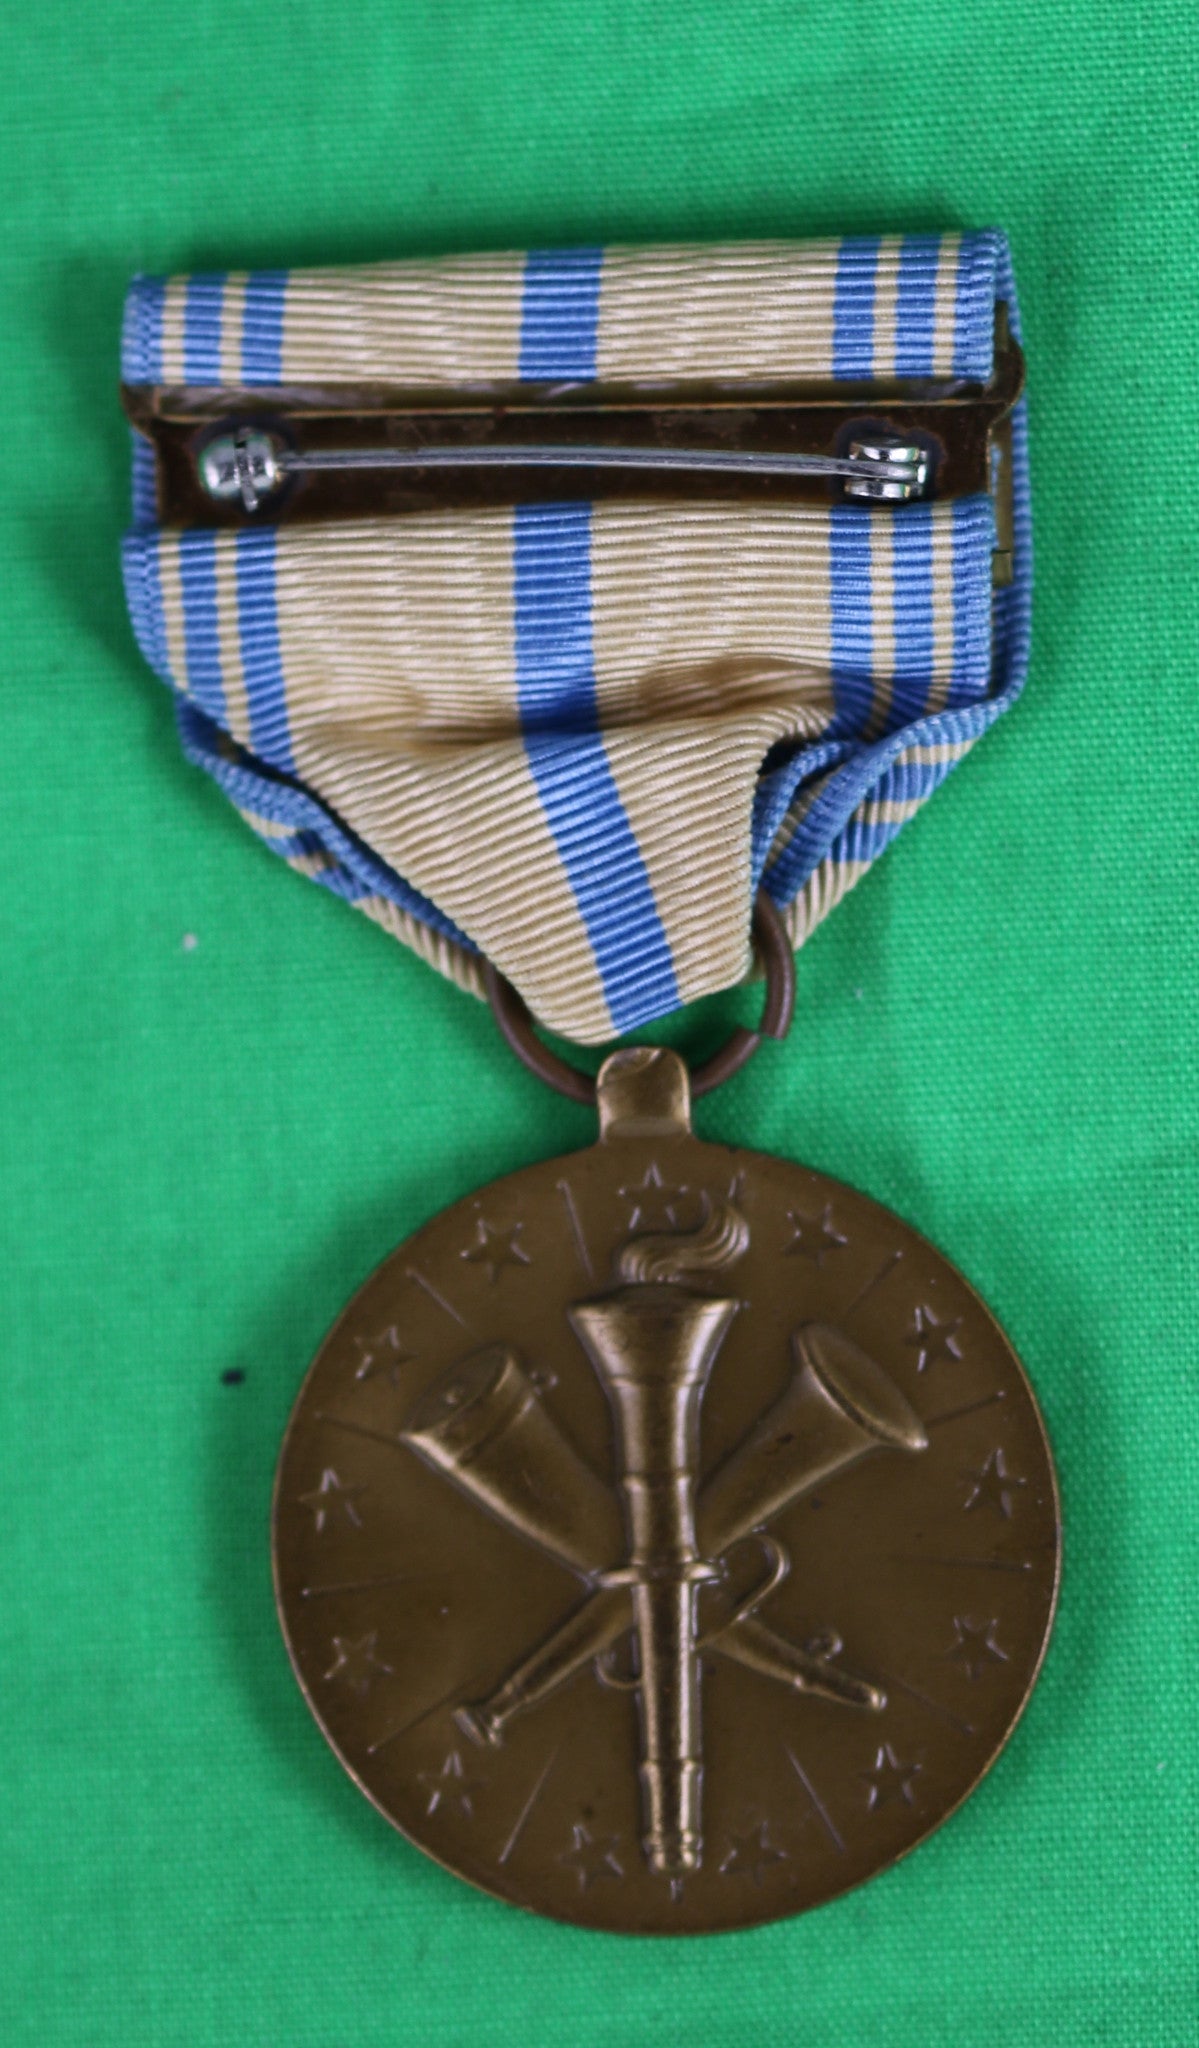 Armed Forces Reserve Medal - Air Force